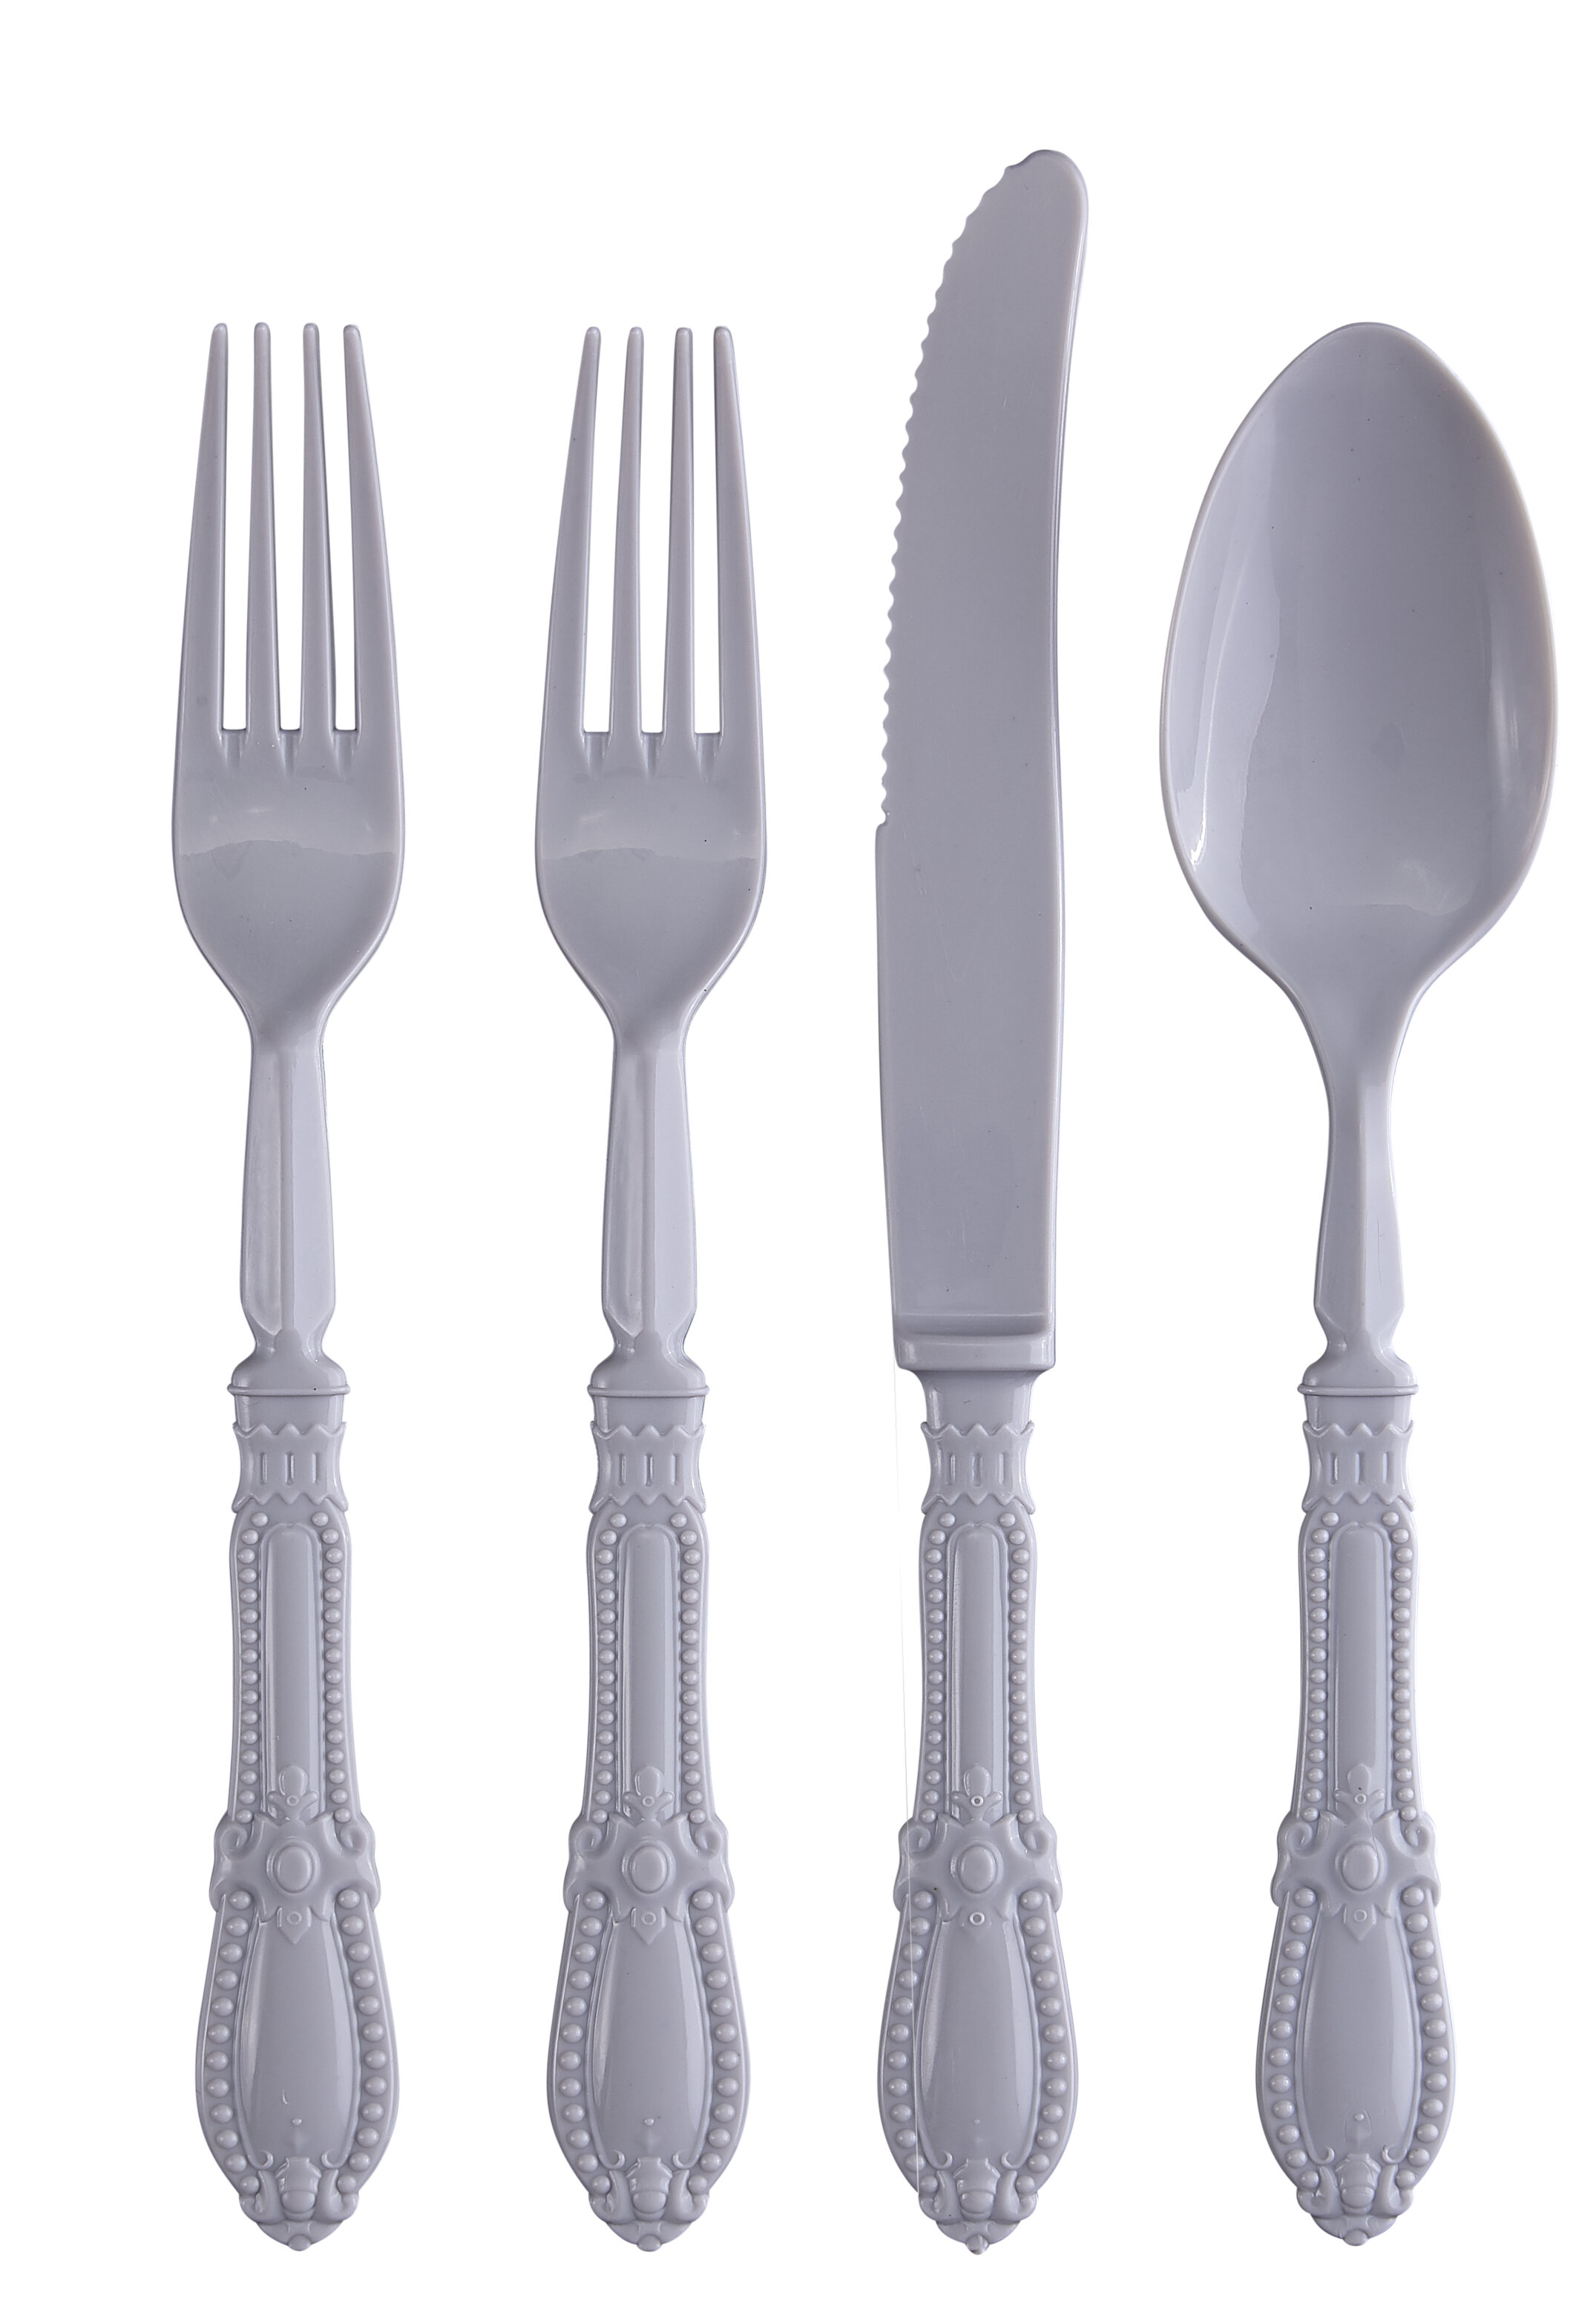 White Baroque Disposable Plastic Cutlery Set - 20 Spoons, 20 Forks and 20  Knives